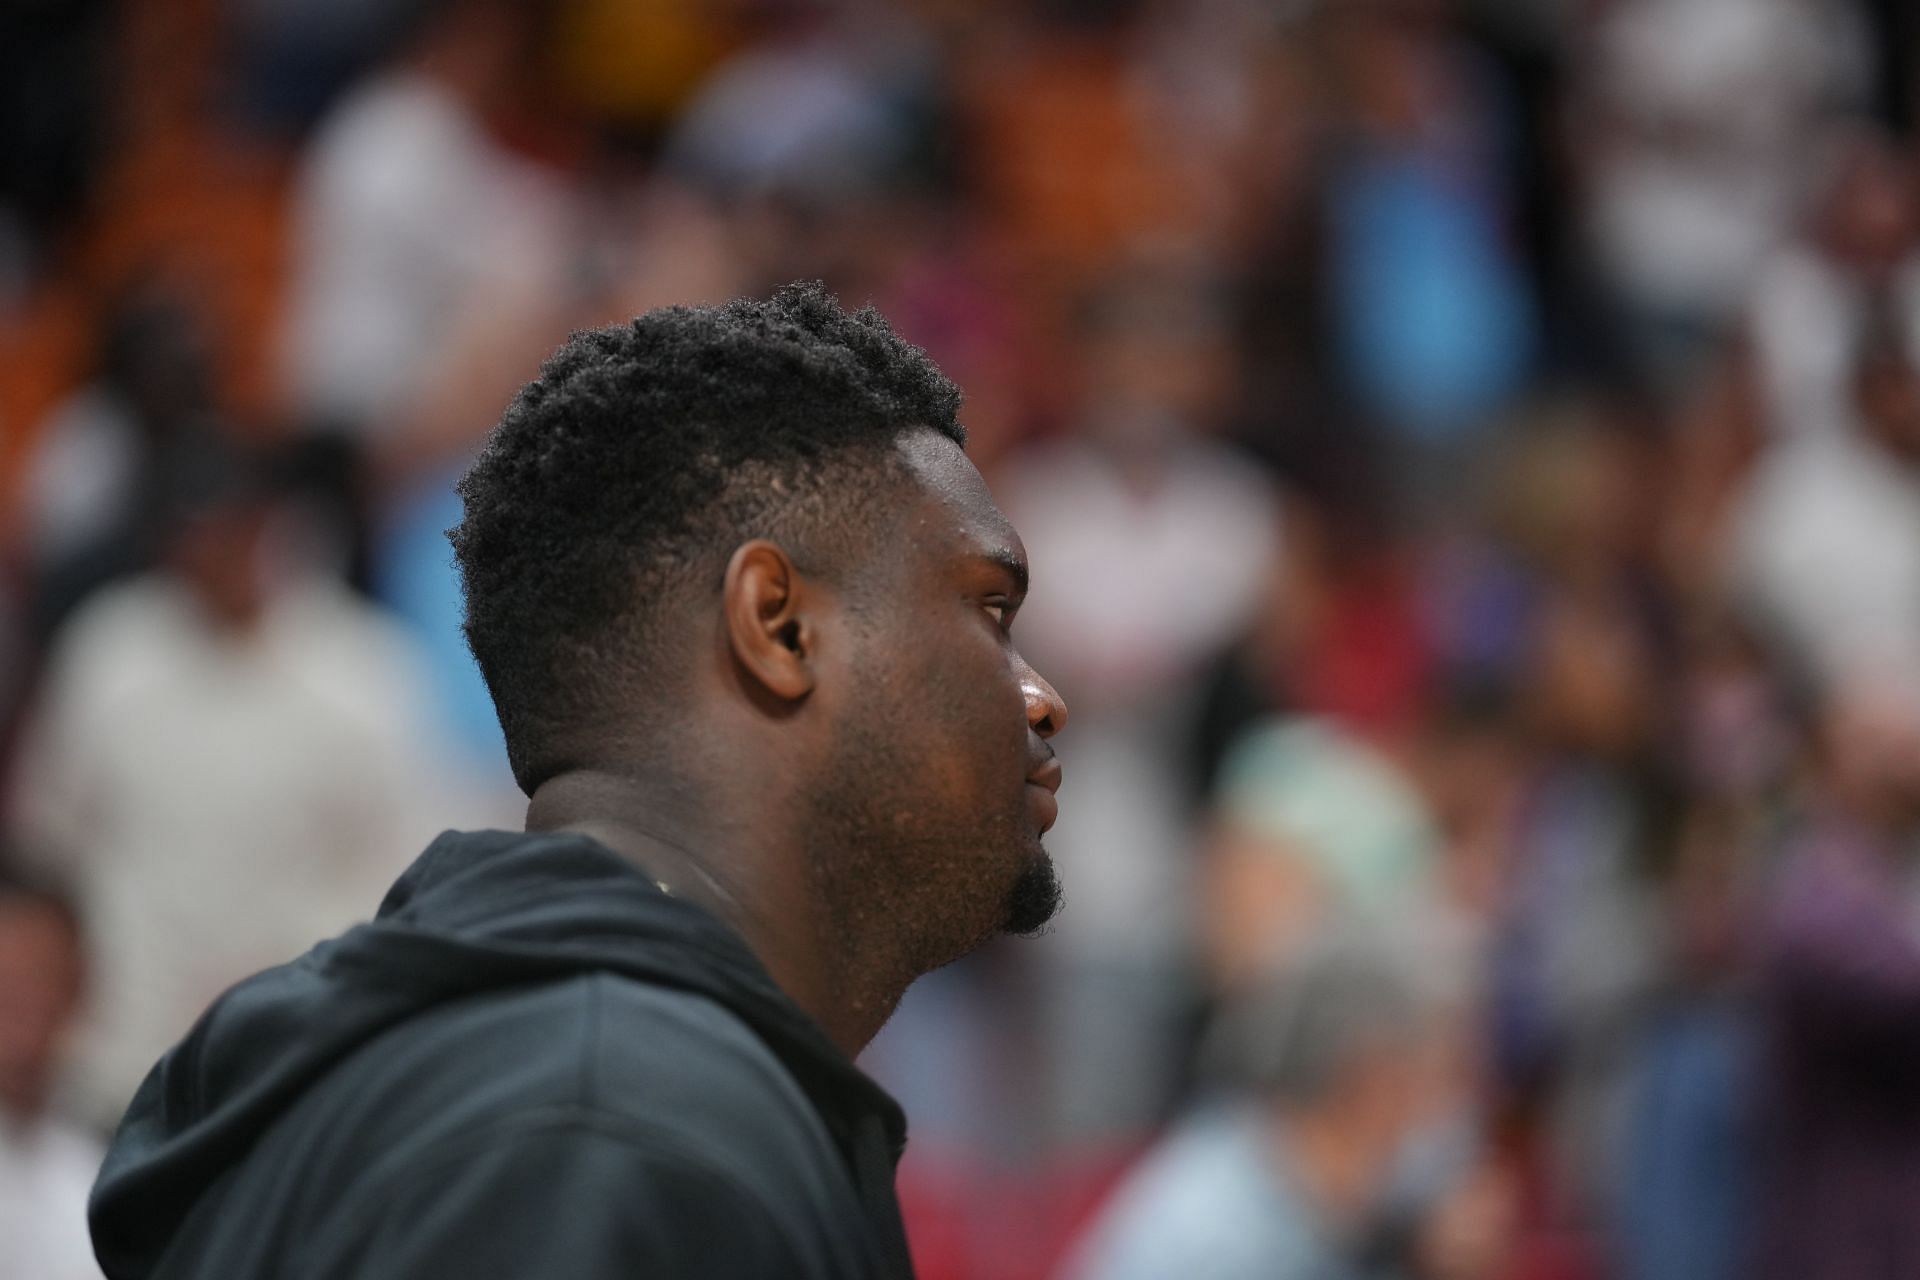 Zion Williamson of the New Orleans Pelicans leaves the bench after a game against the Miami Heat on Nov. 17 in Miami, Florida.